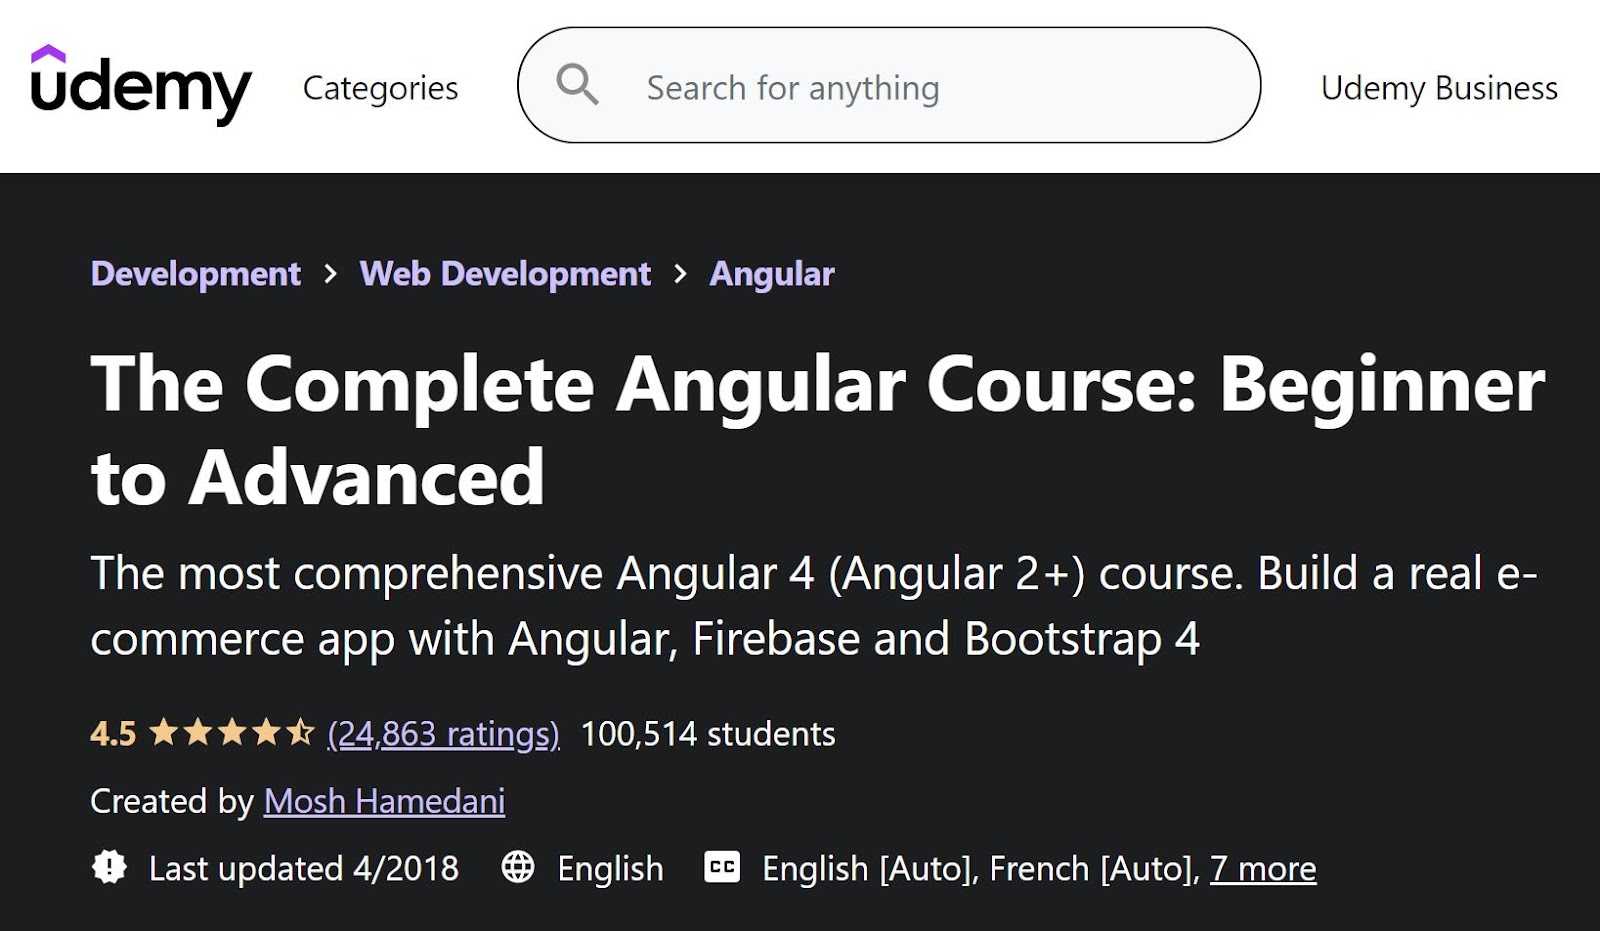 Complete Angular Course Guide Udemy Screenshot